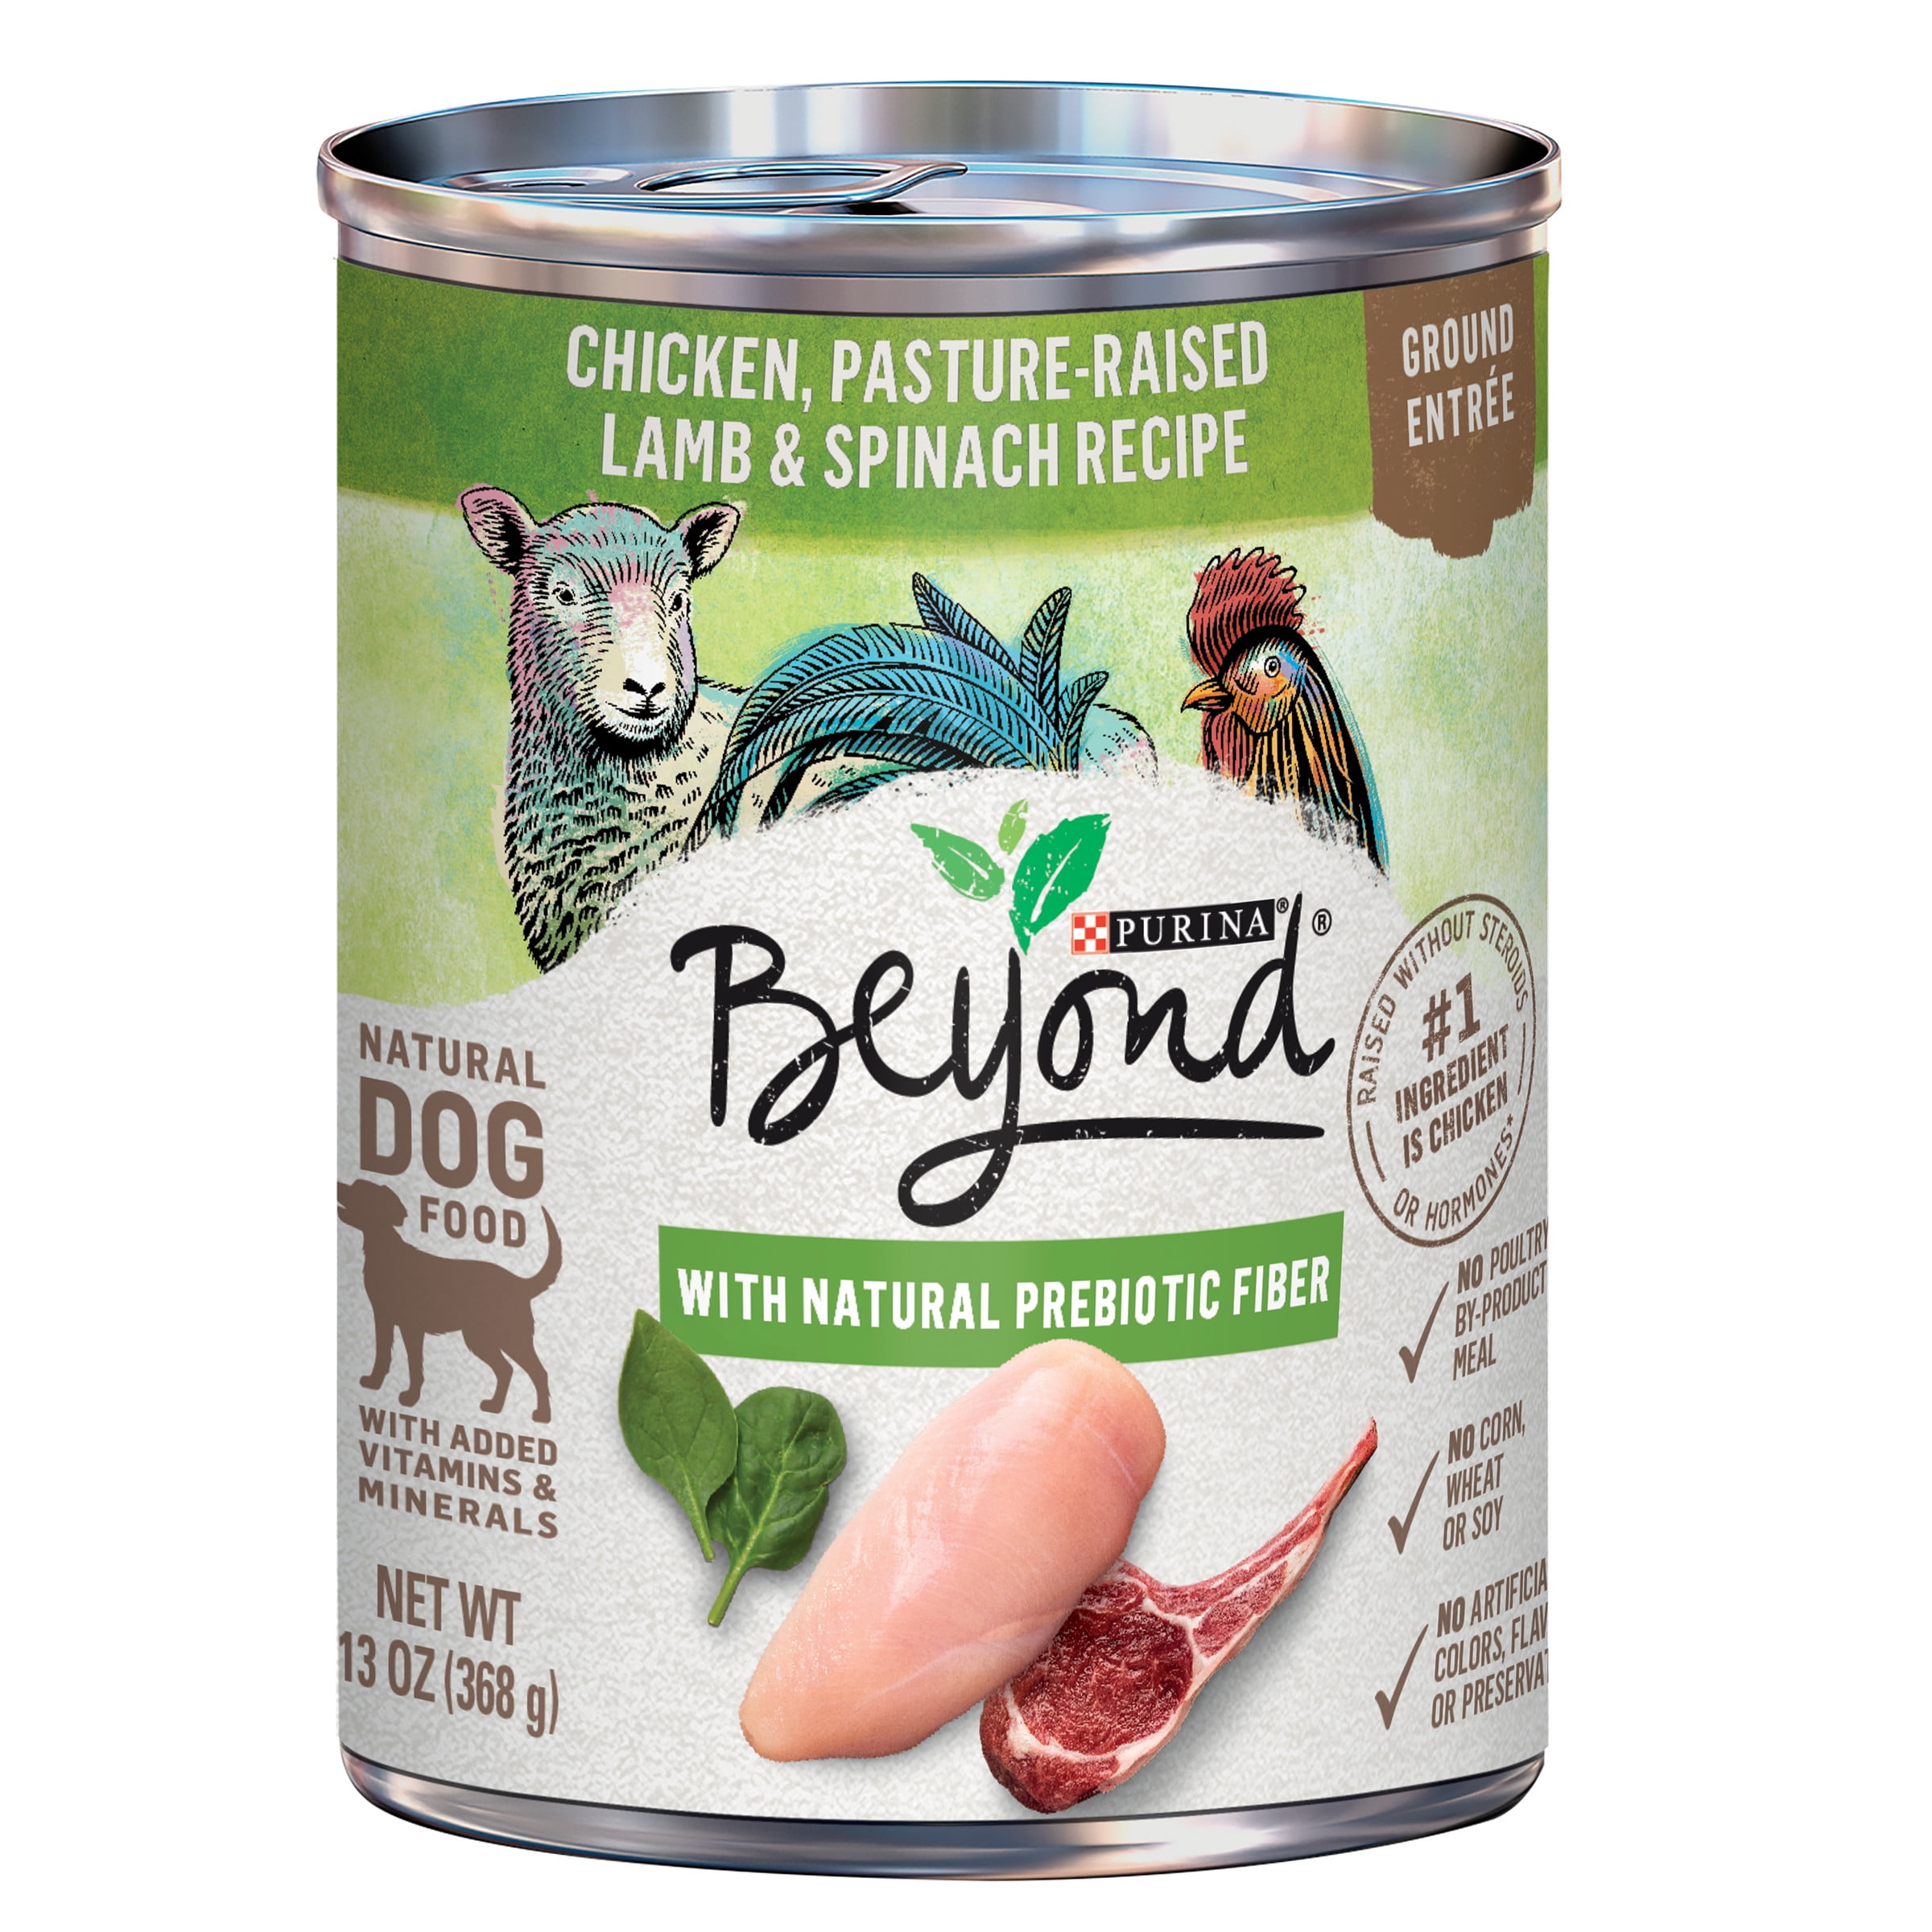 Purina Beyond Grain Free, Natural Ground Entree Wet Dog Food, Grain Free Chicken, Lamb & Spinach Recipe, 13 oz. Can